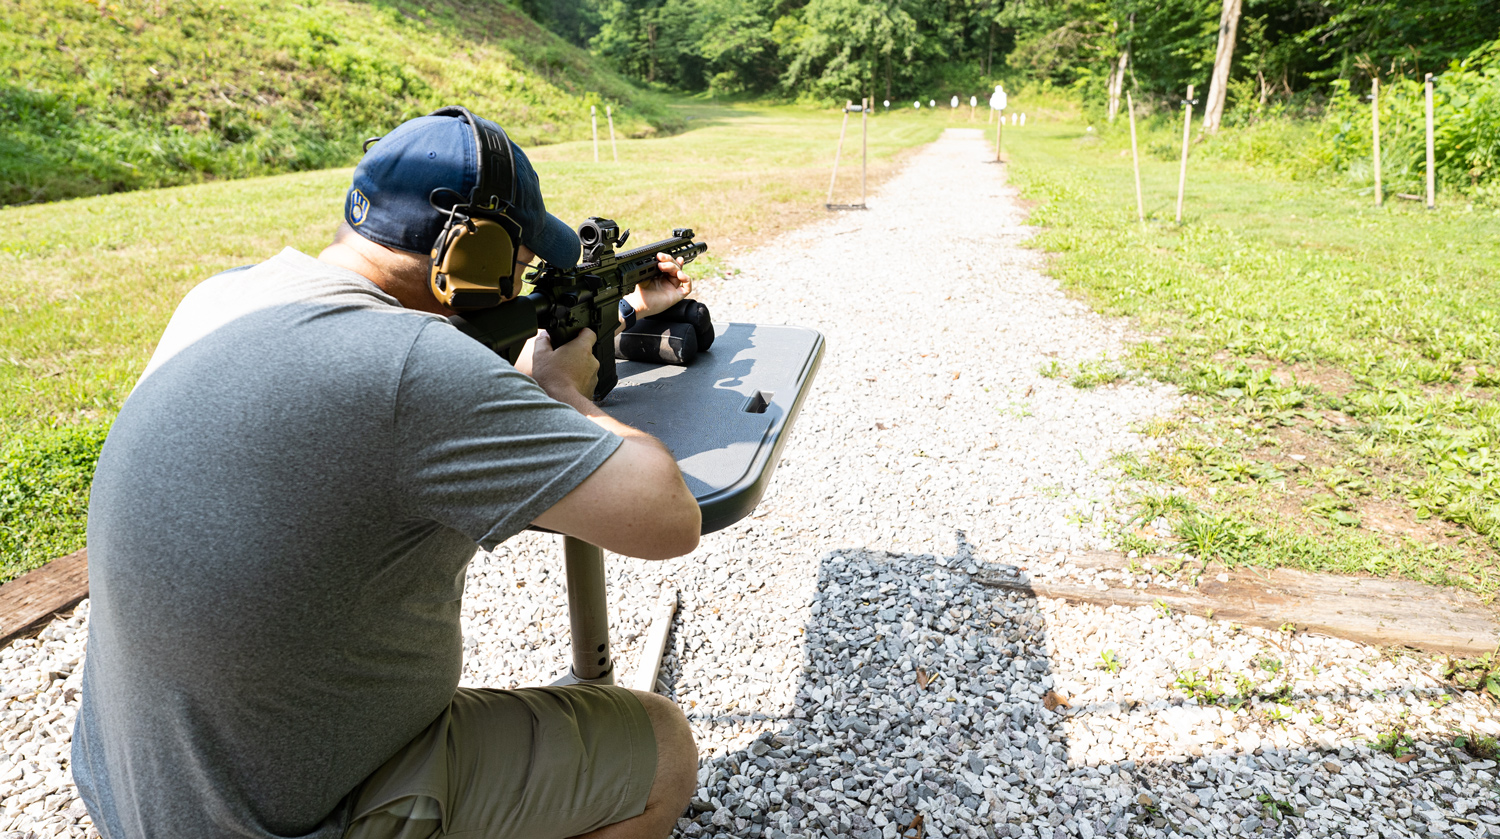 The author shooting spire point bullets at a shooting range